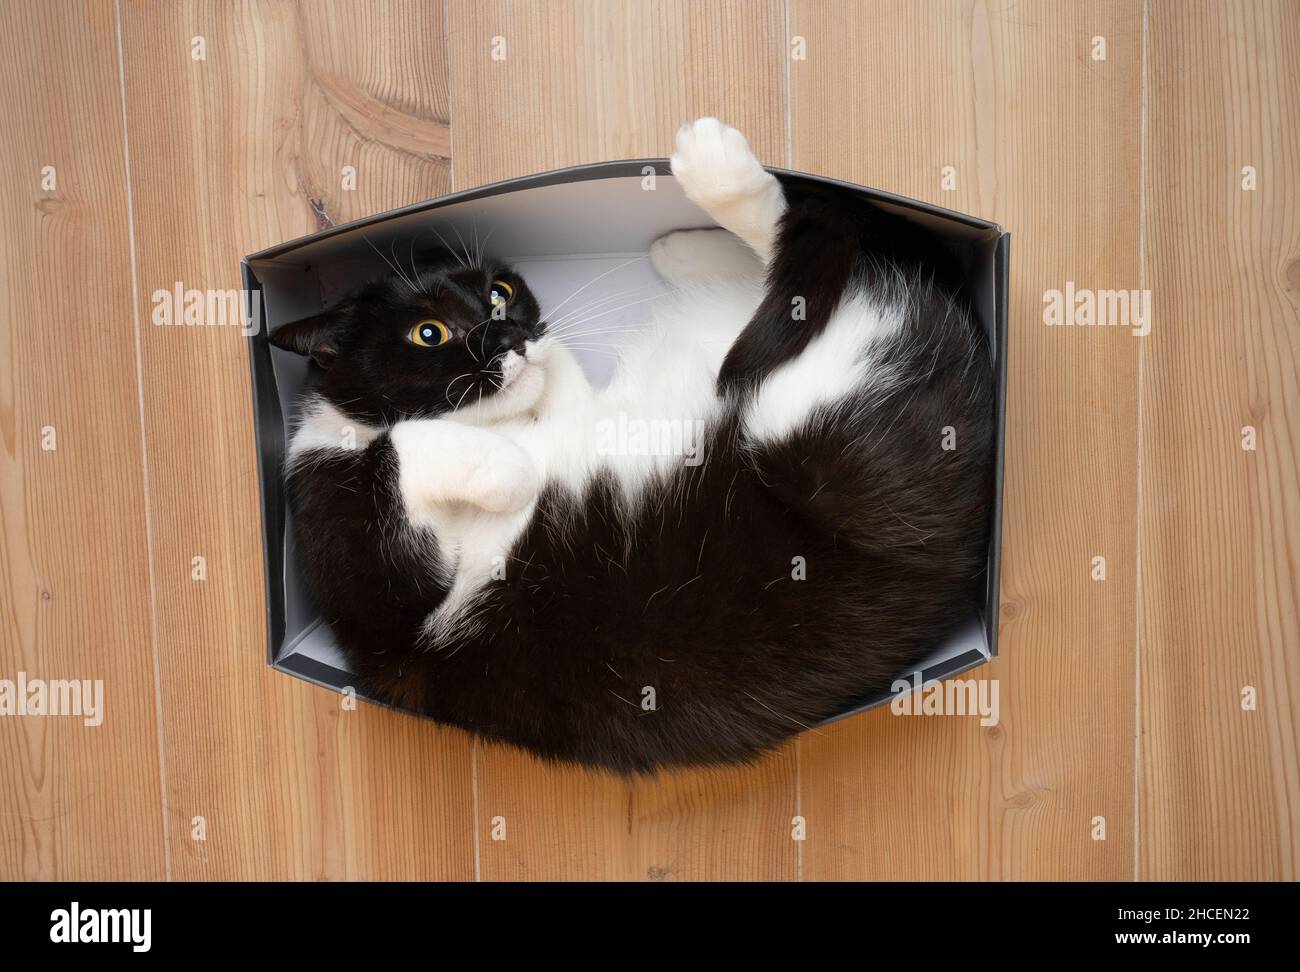 top view of a cute black and white cat resting in small shoe cardboard box on the floor Stock Photo